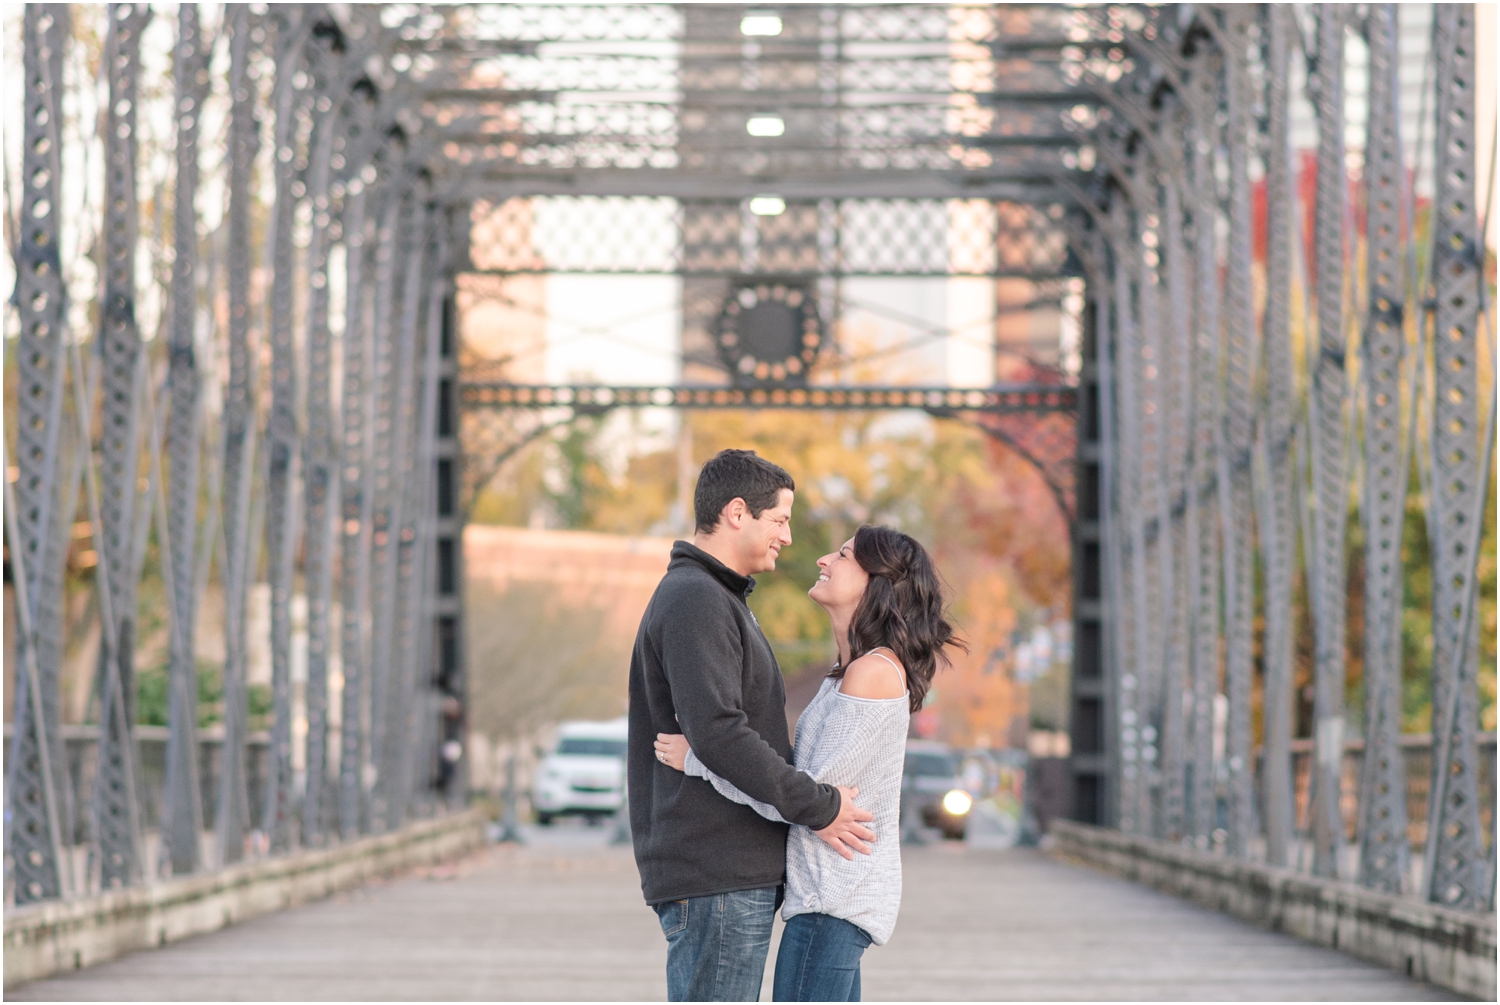 Headwaters Park Engagement Pictures and Promenade Park Engagement Photos Sunset Downtown Engagement Session Rose Courts Photography